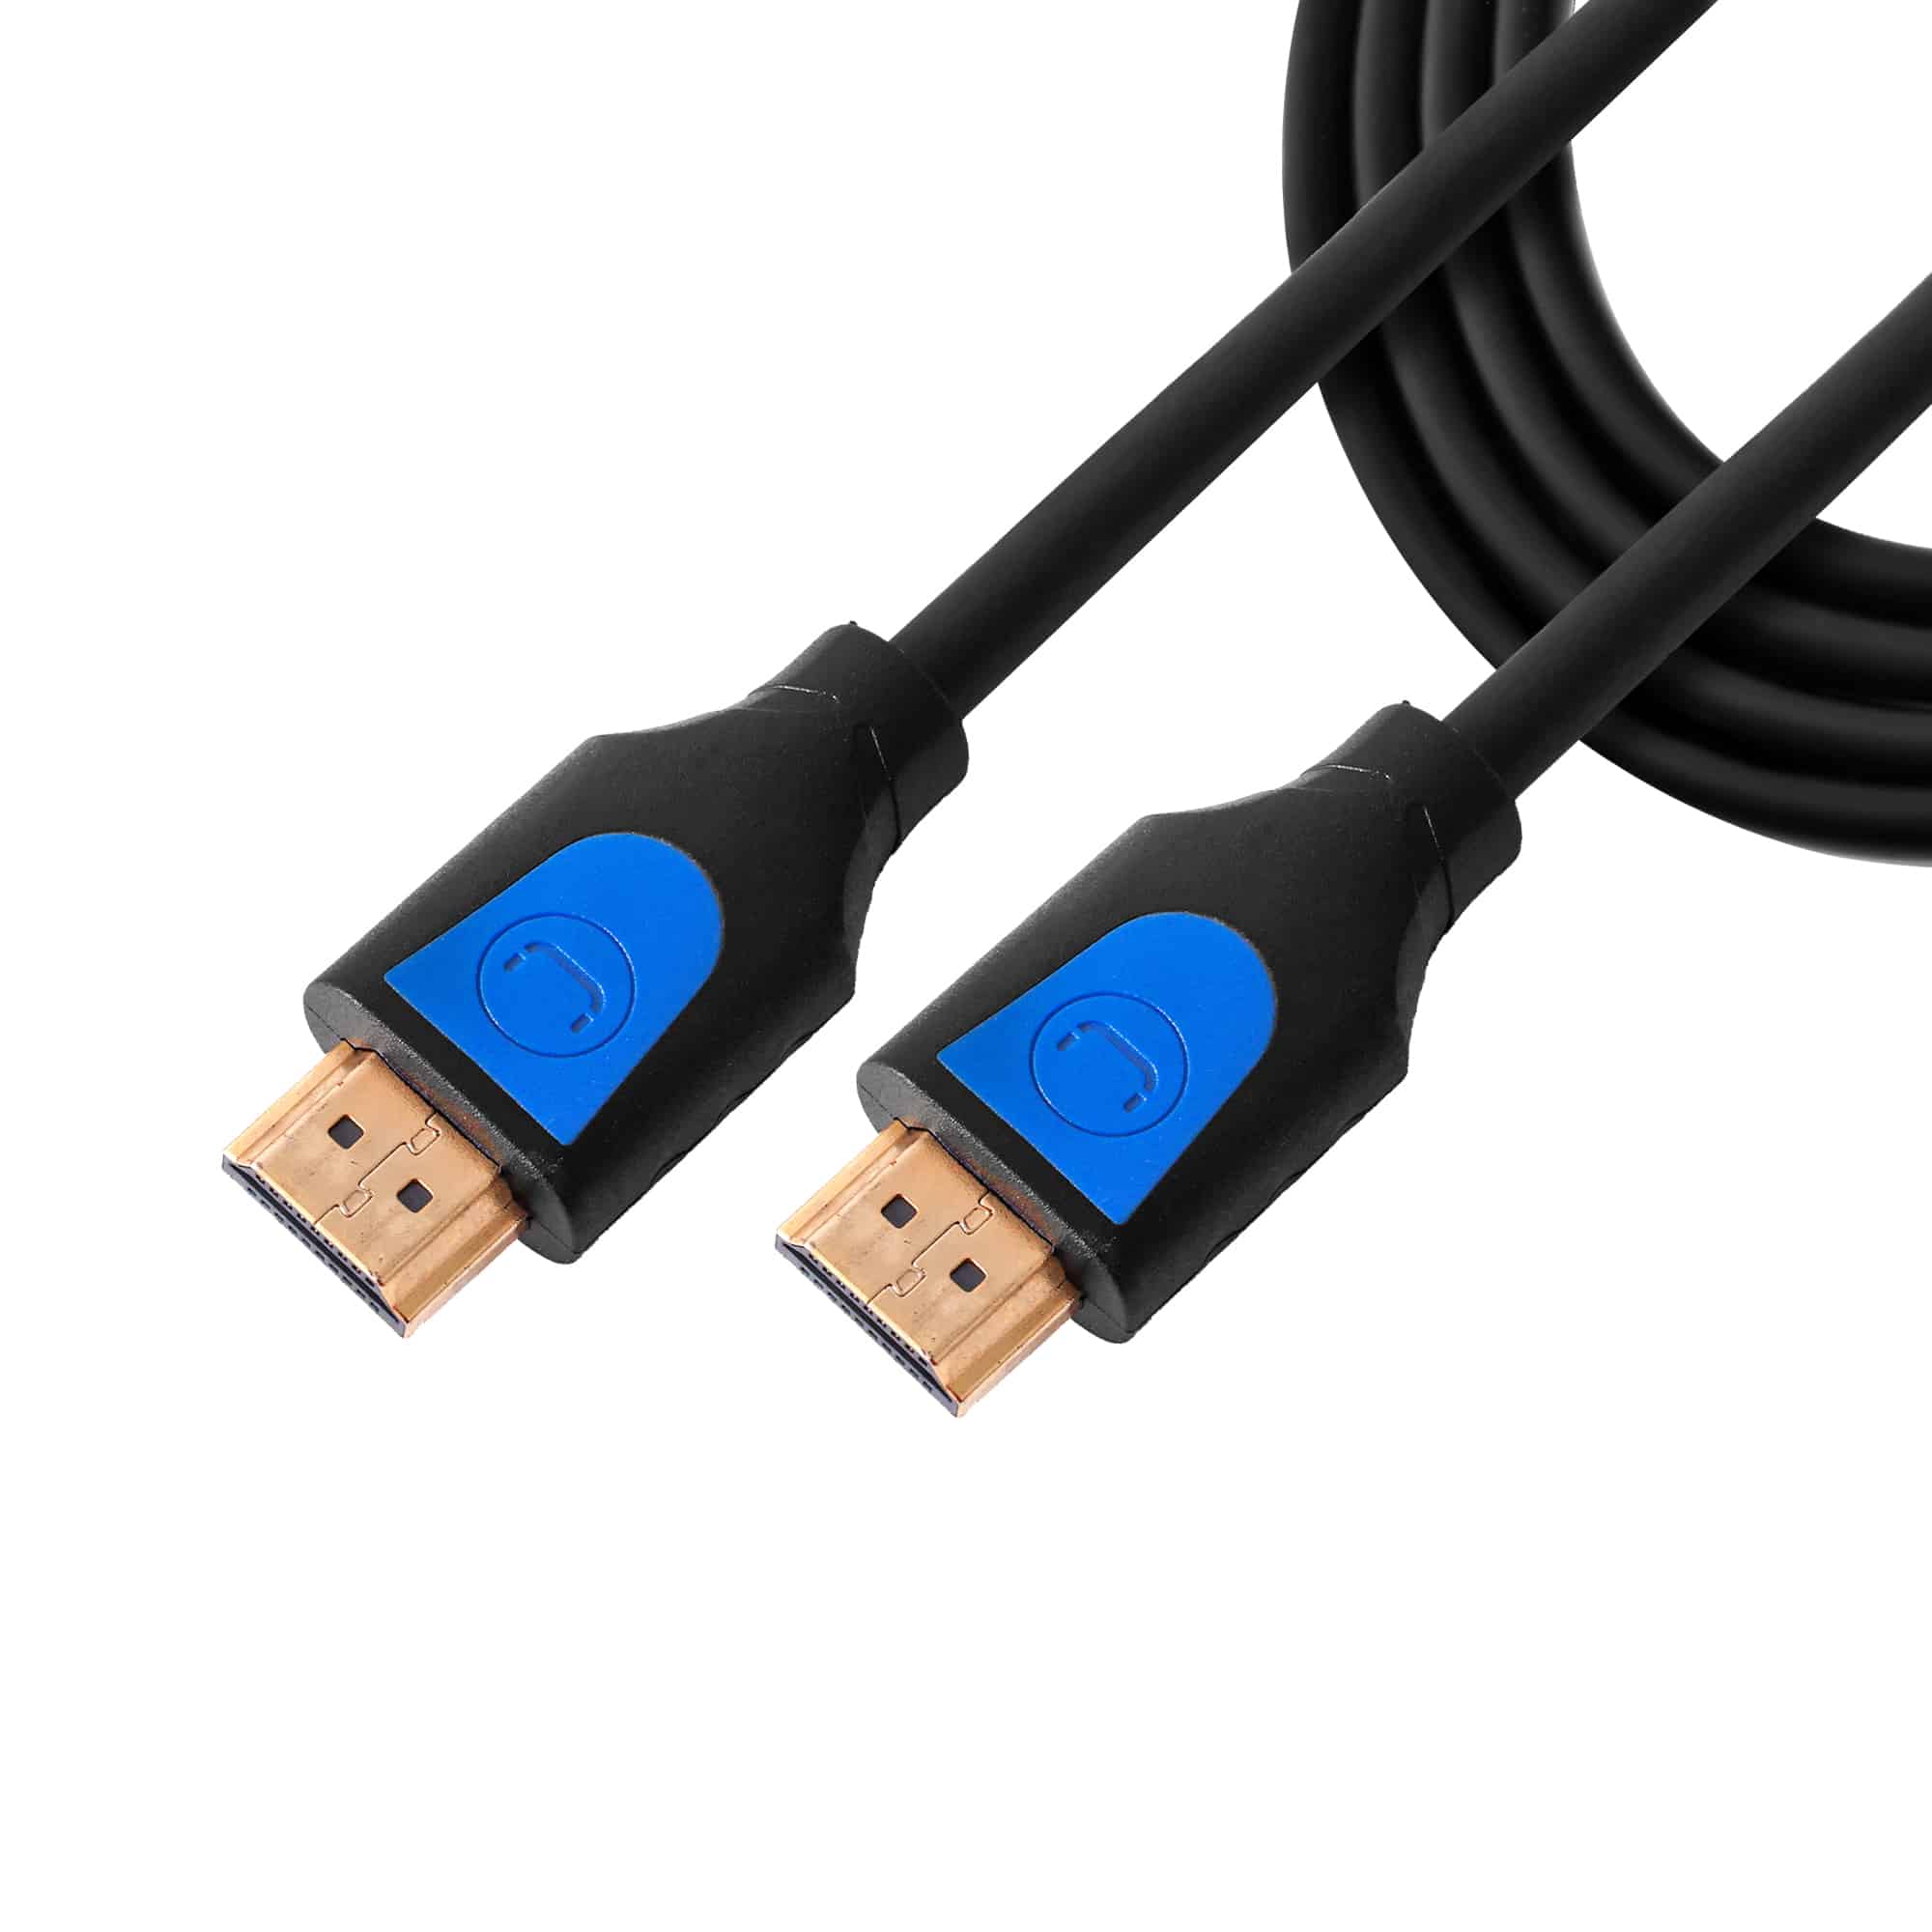 Cable Hdmi Corto Valonic, 7 PuLG. / 0,6 Pies, 4k, Full